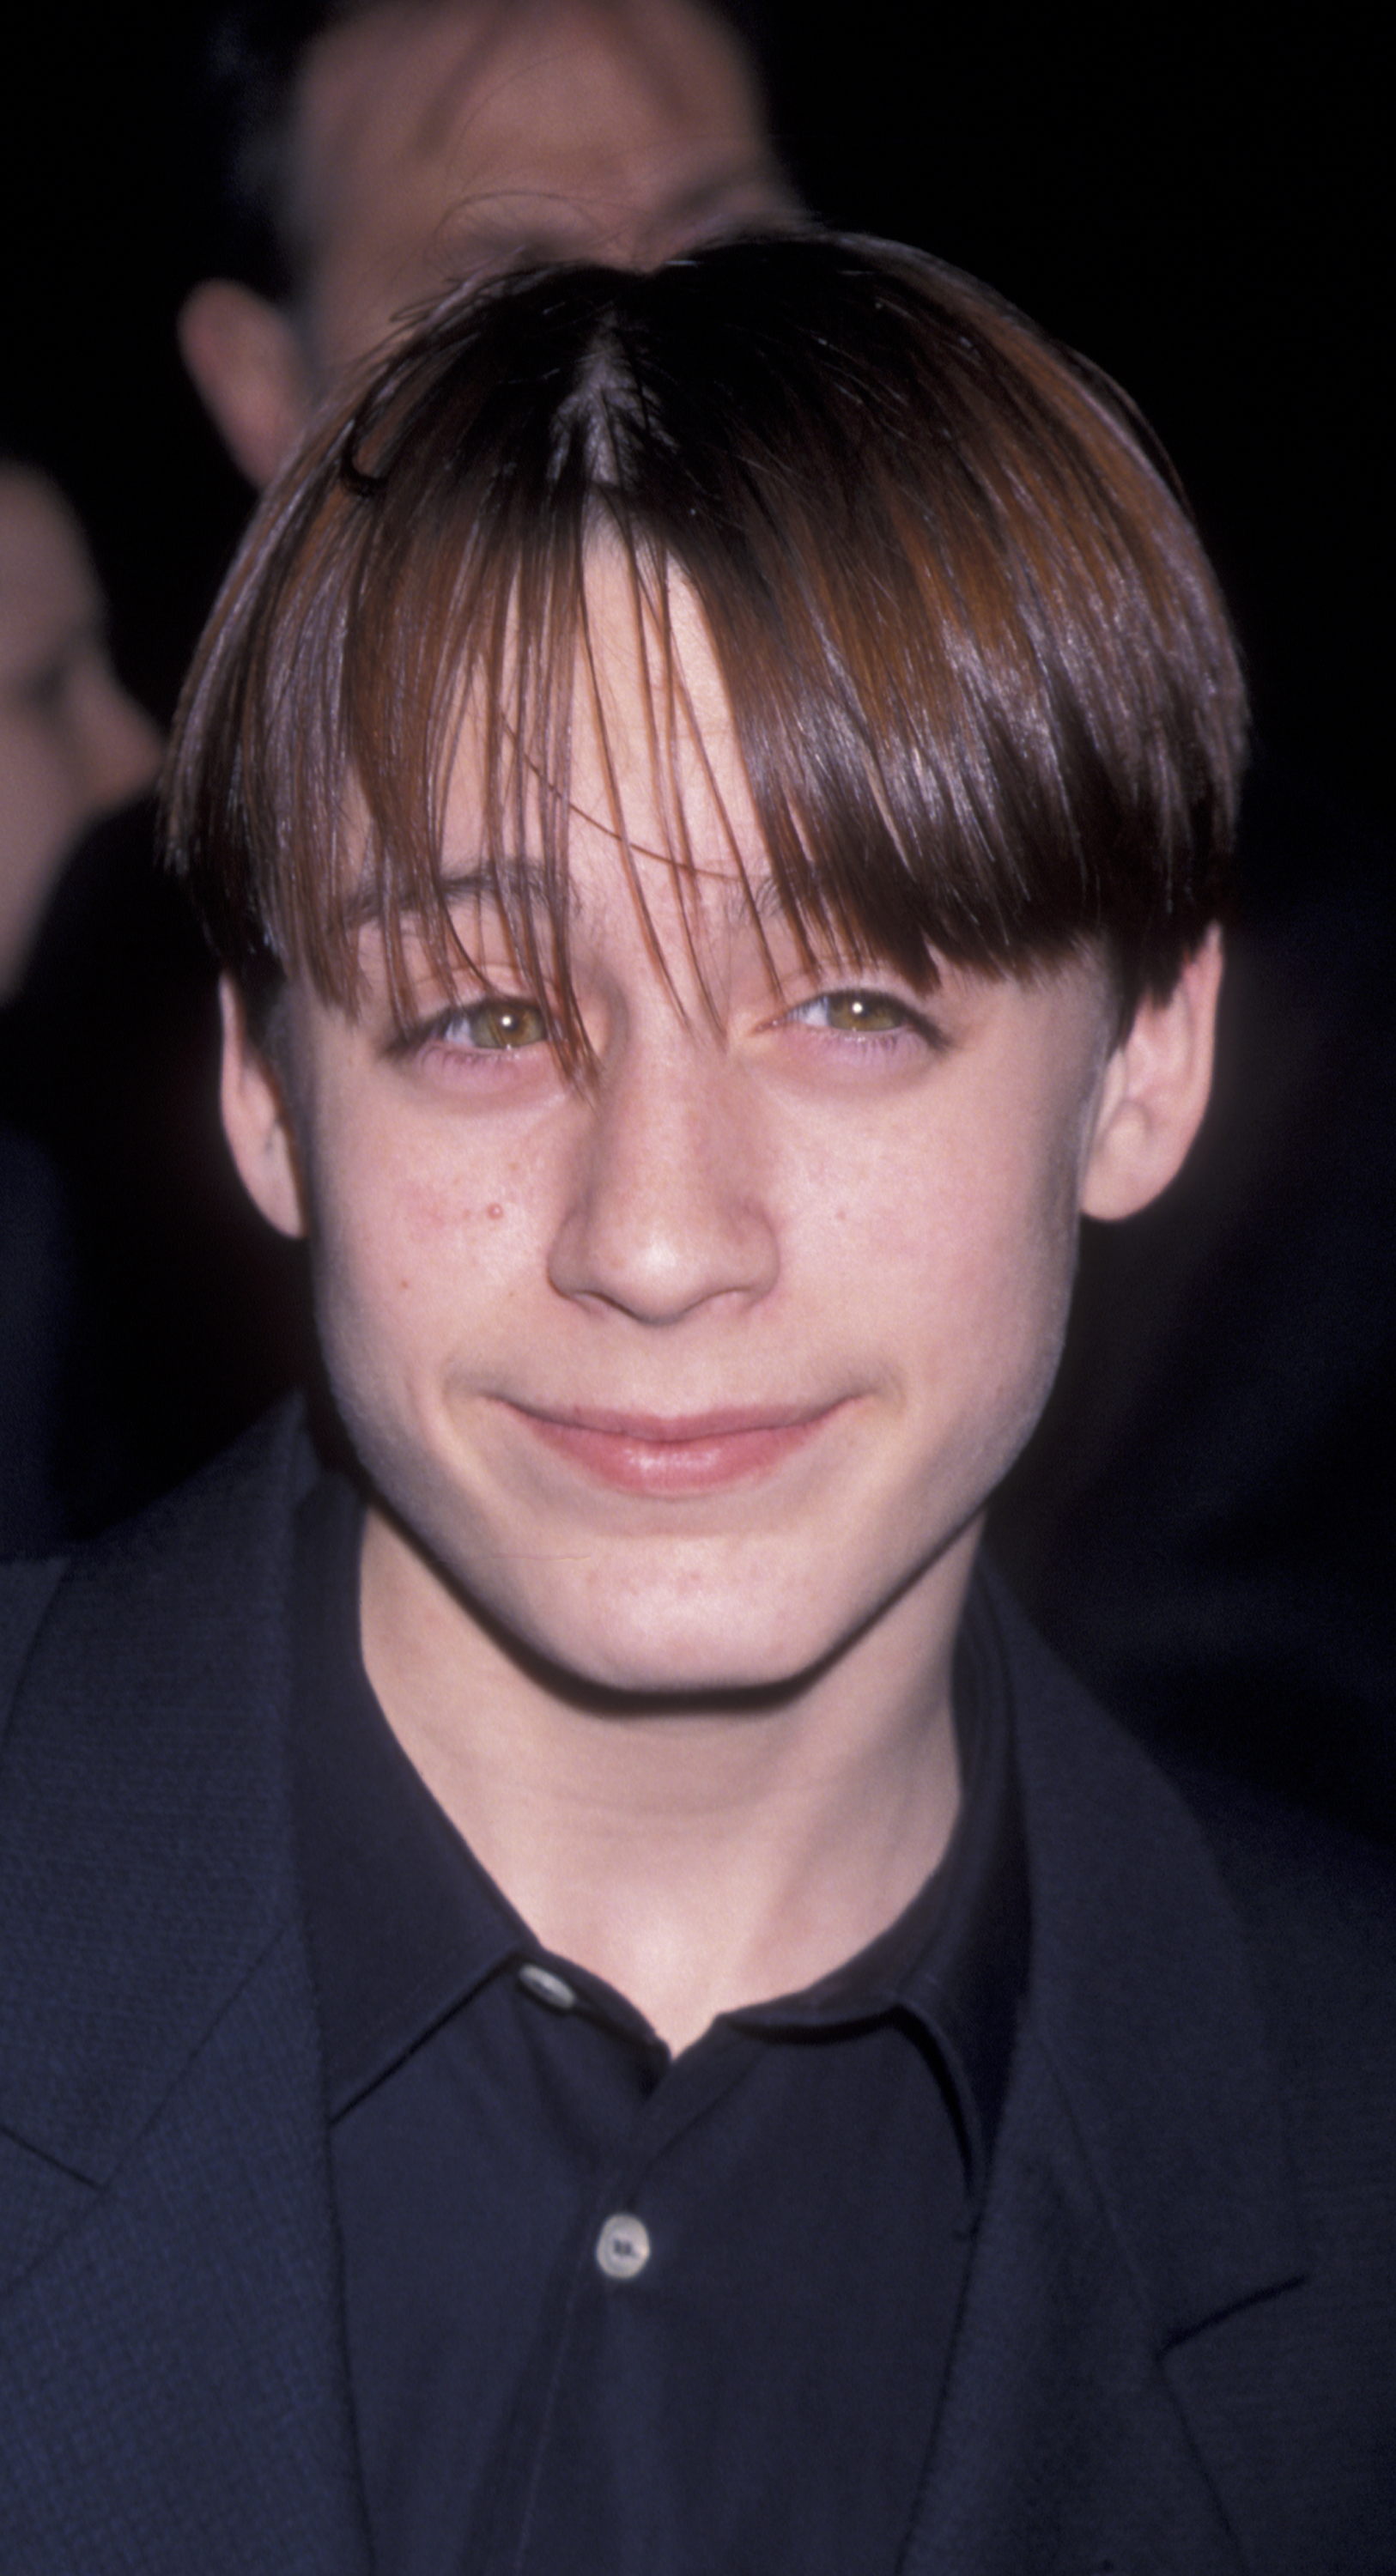 Kieran Culkin attends the premiere of "Cider House Rules" on December 7, 1999 in Beverly Hills, California | Source: Getty Images